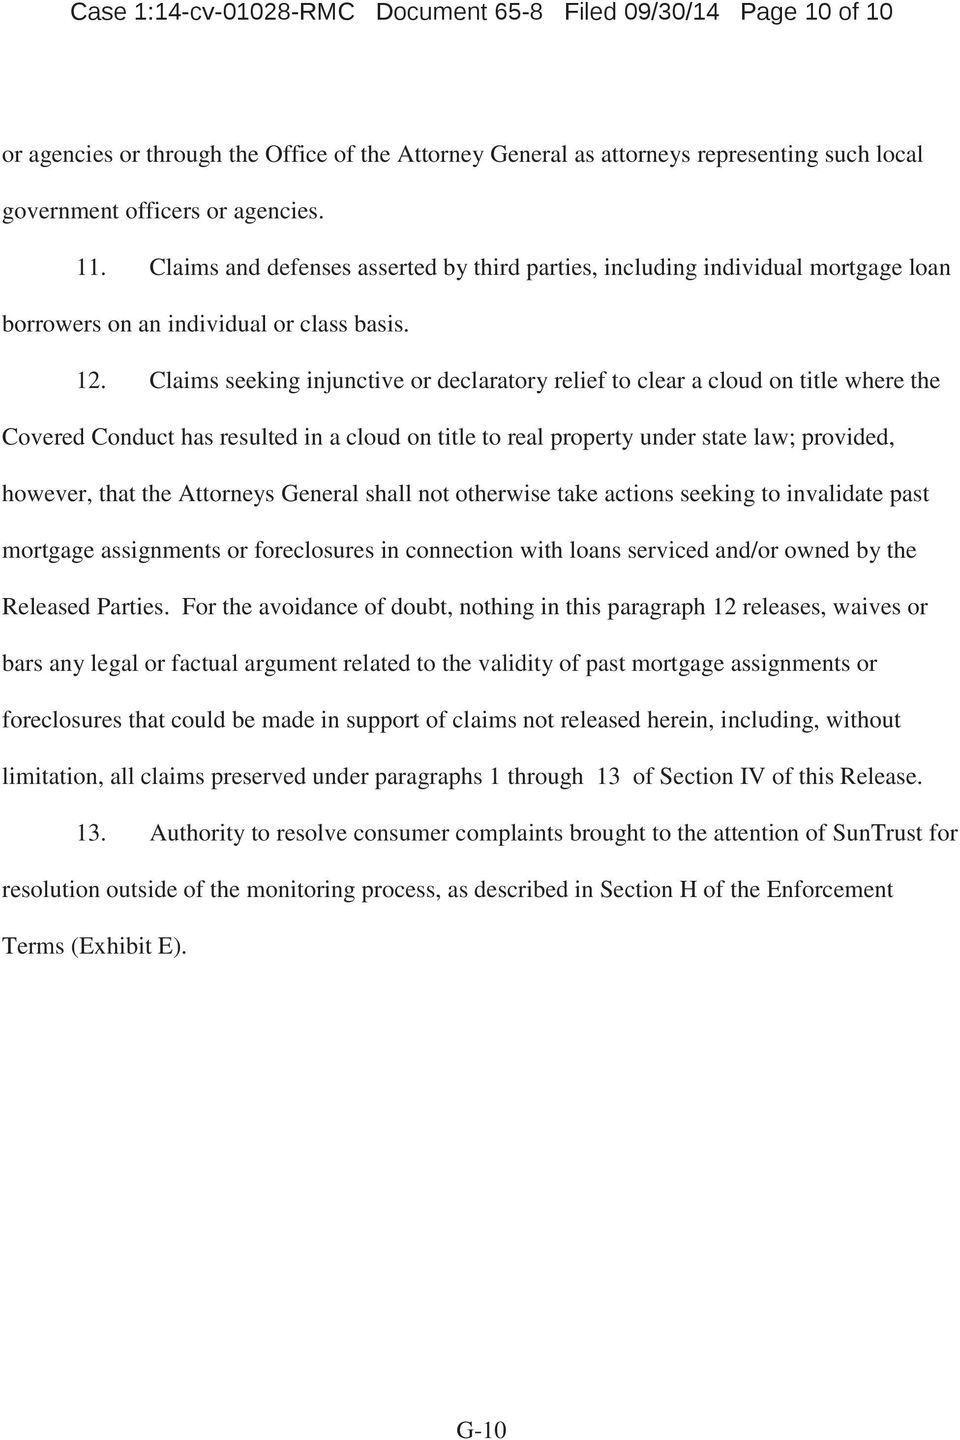 Claims seeking injunctive or declaratory relief to clear a cloud on title where the Covered Conduct has resulted in a cloud on title to real property under state law; provided, however, that the